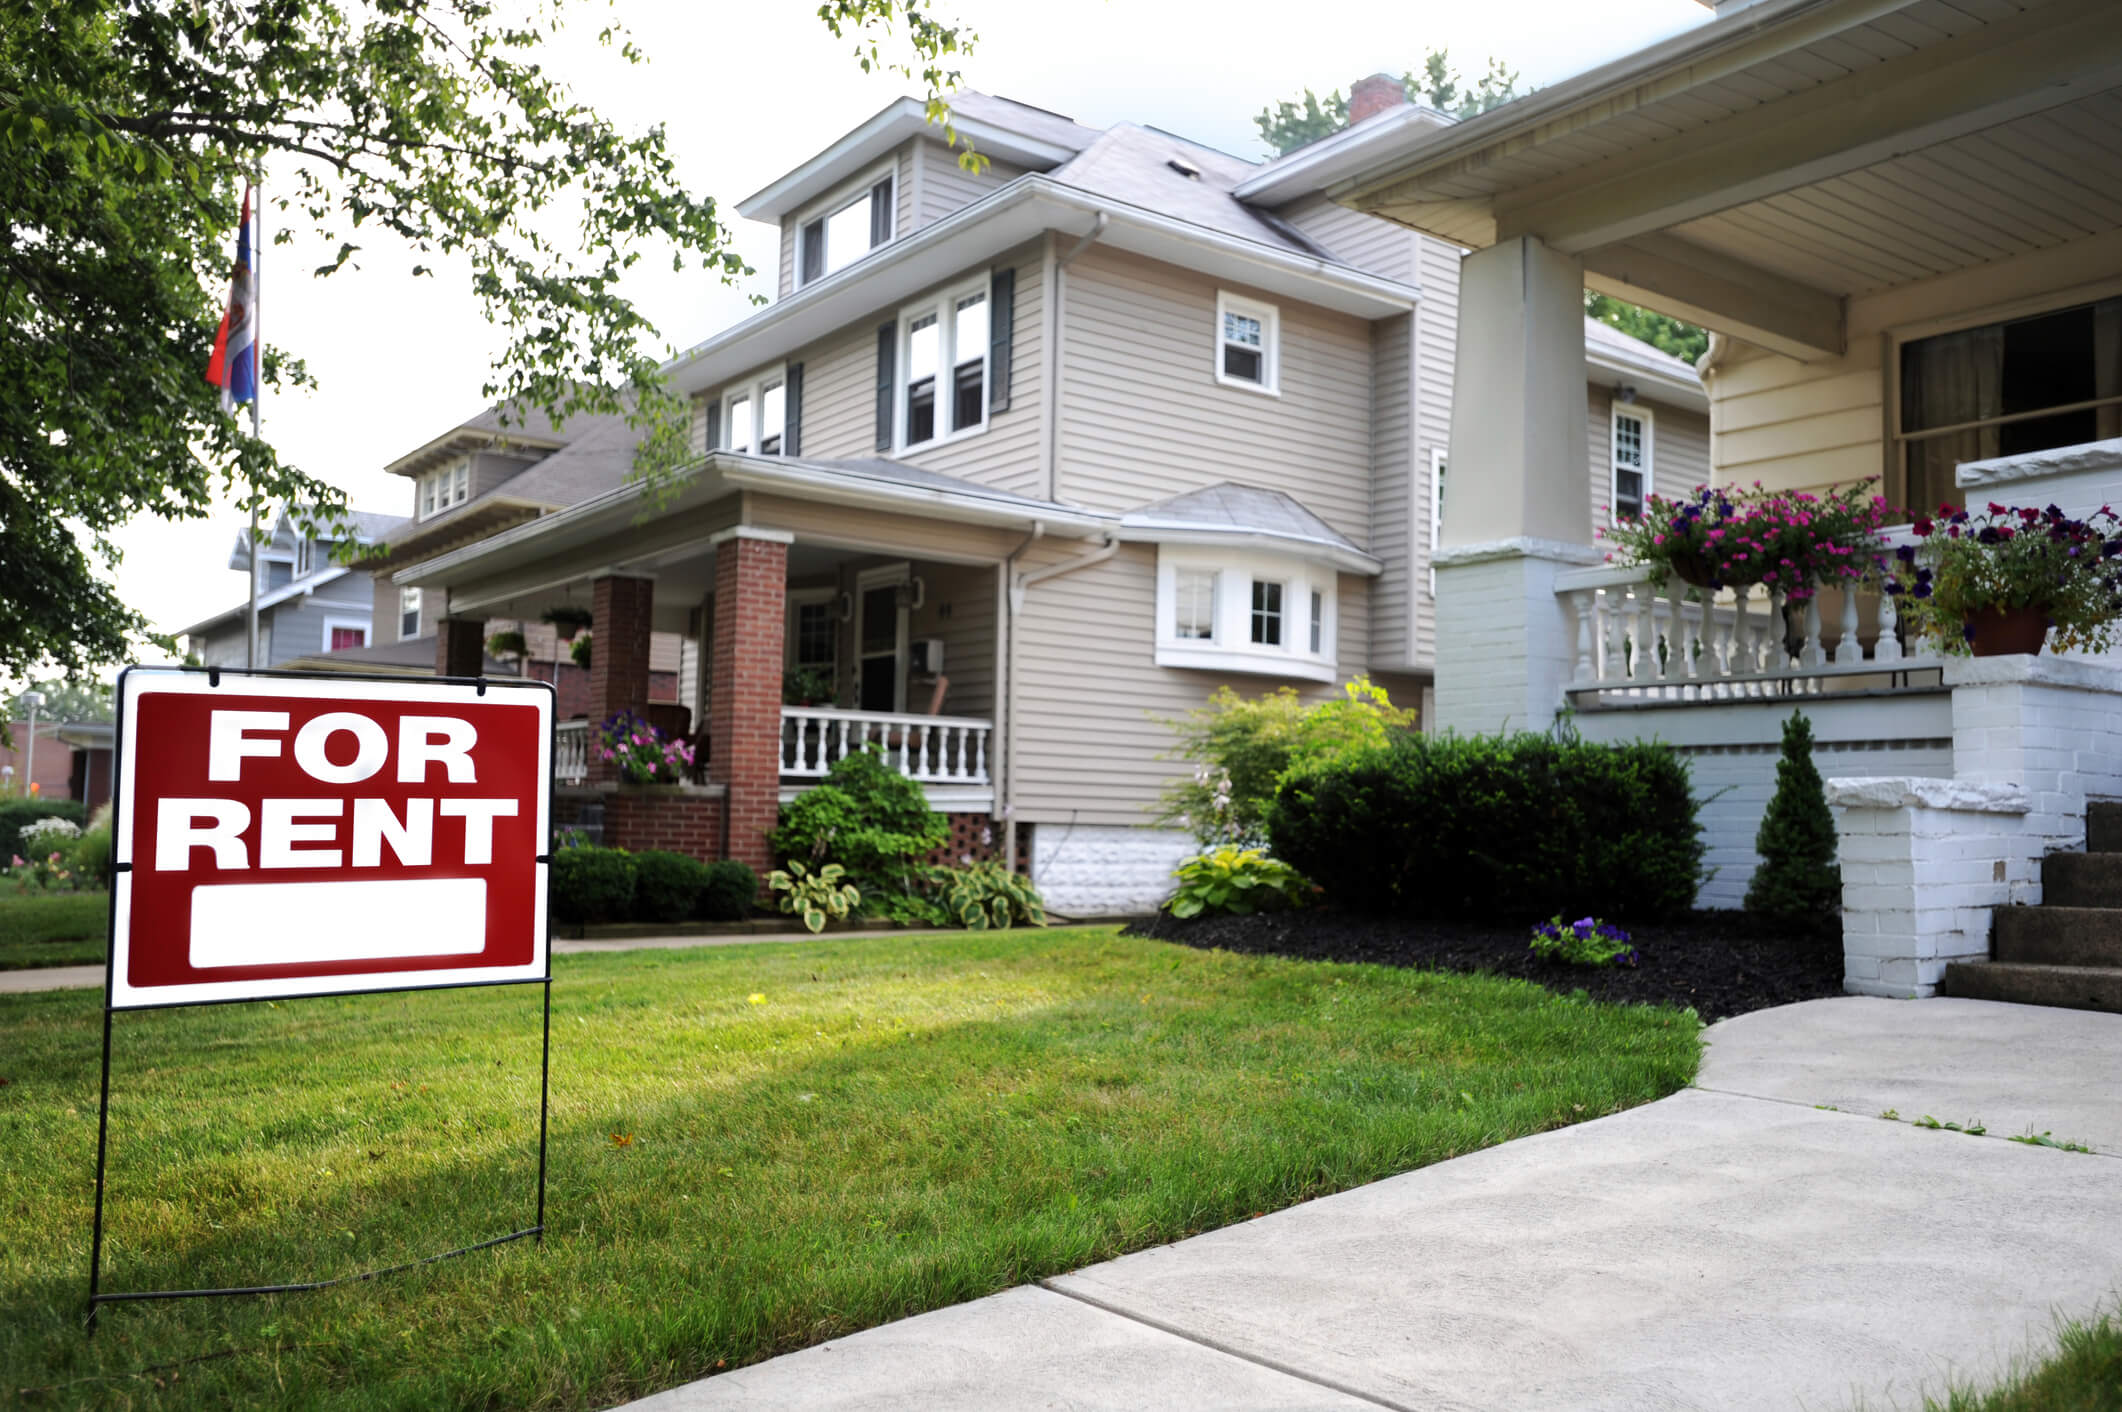 How to Invest in Rental Properties: Is it a Good Choice as a Real Estate Investor?